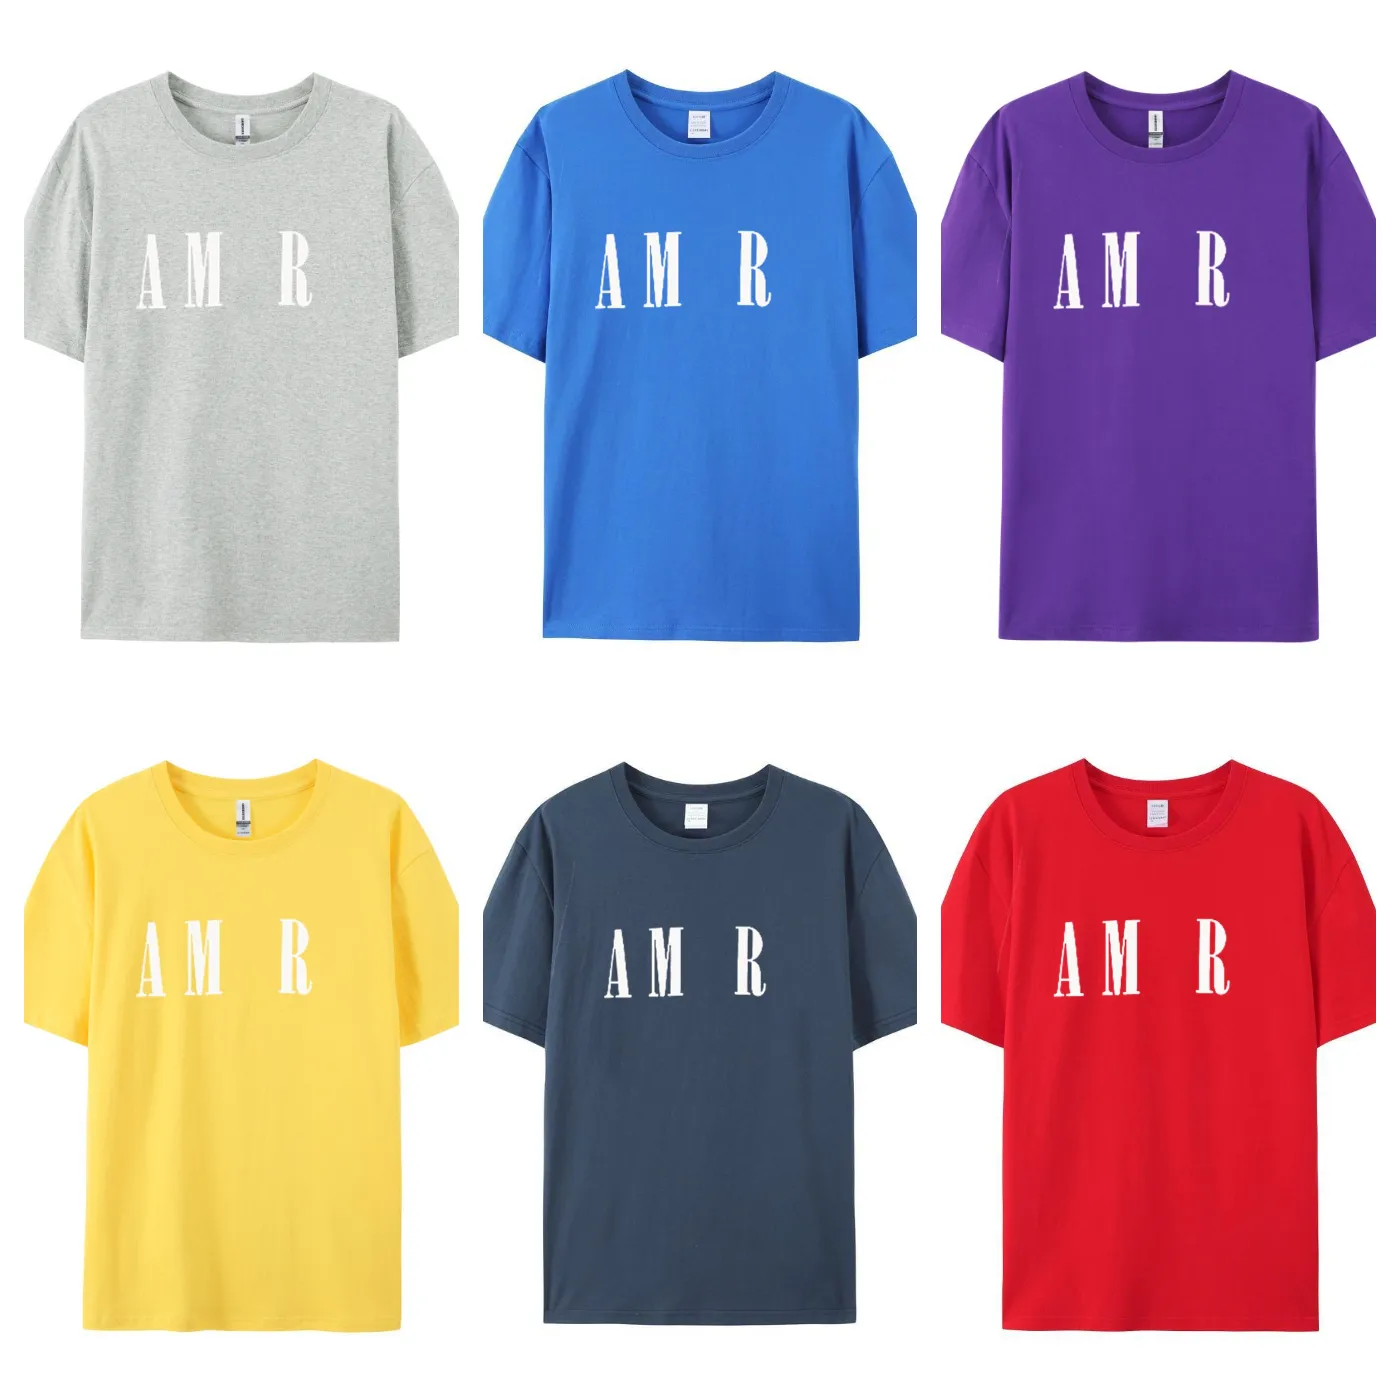 Tops fashion tshirt designer clothes women Luxurious and sport clothes for womens Amiracle short sleeves Cotton Regular Letter Purple Yellow Red Gray Size S L M XL j